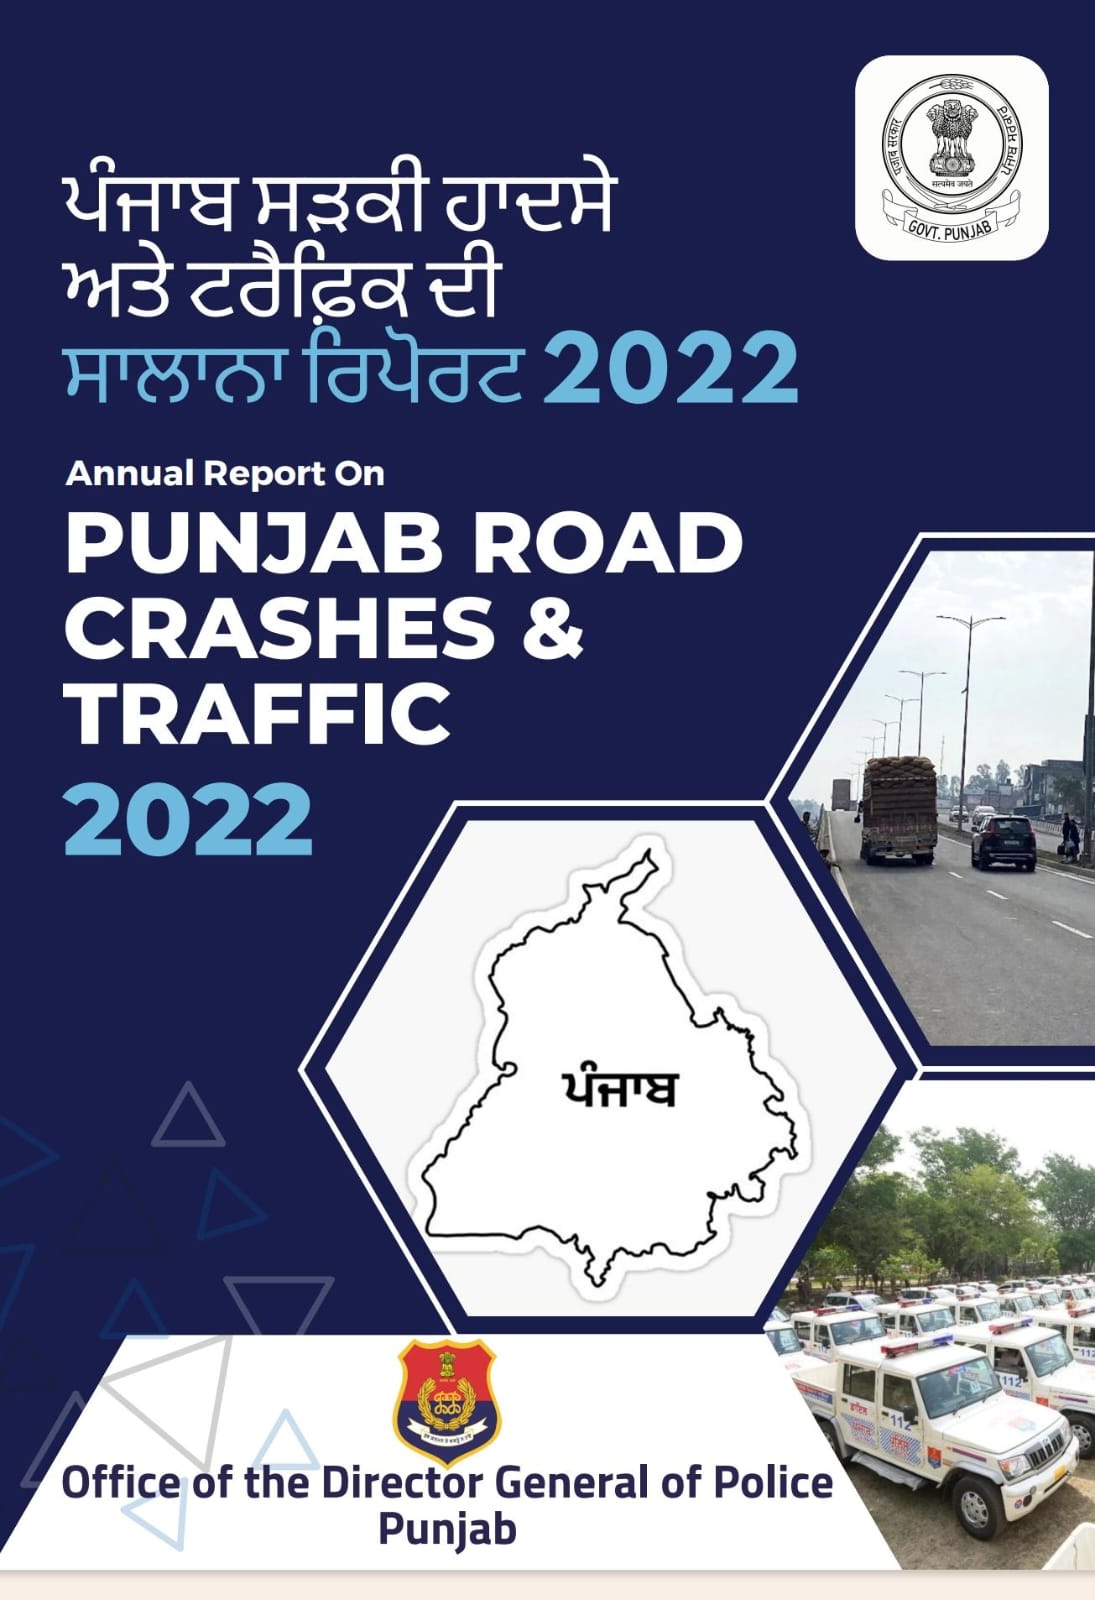 Decrease in road accident deaths in Punjab in 2022 compared to 2021